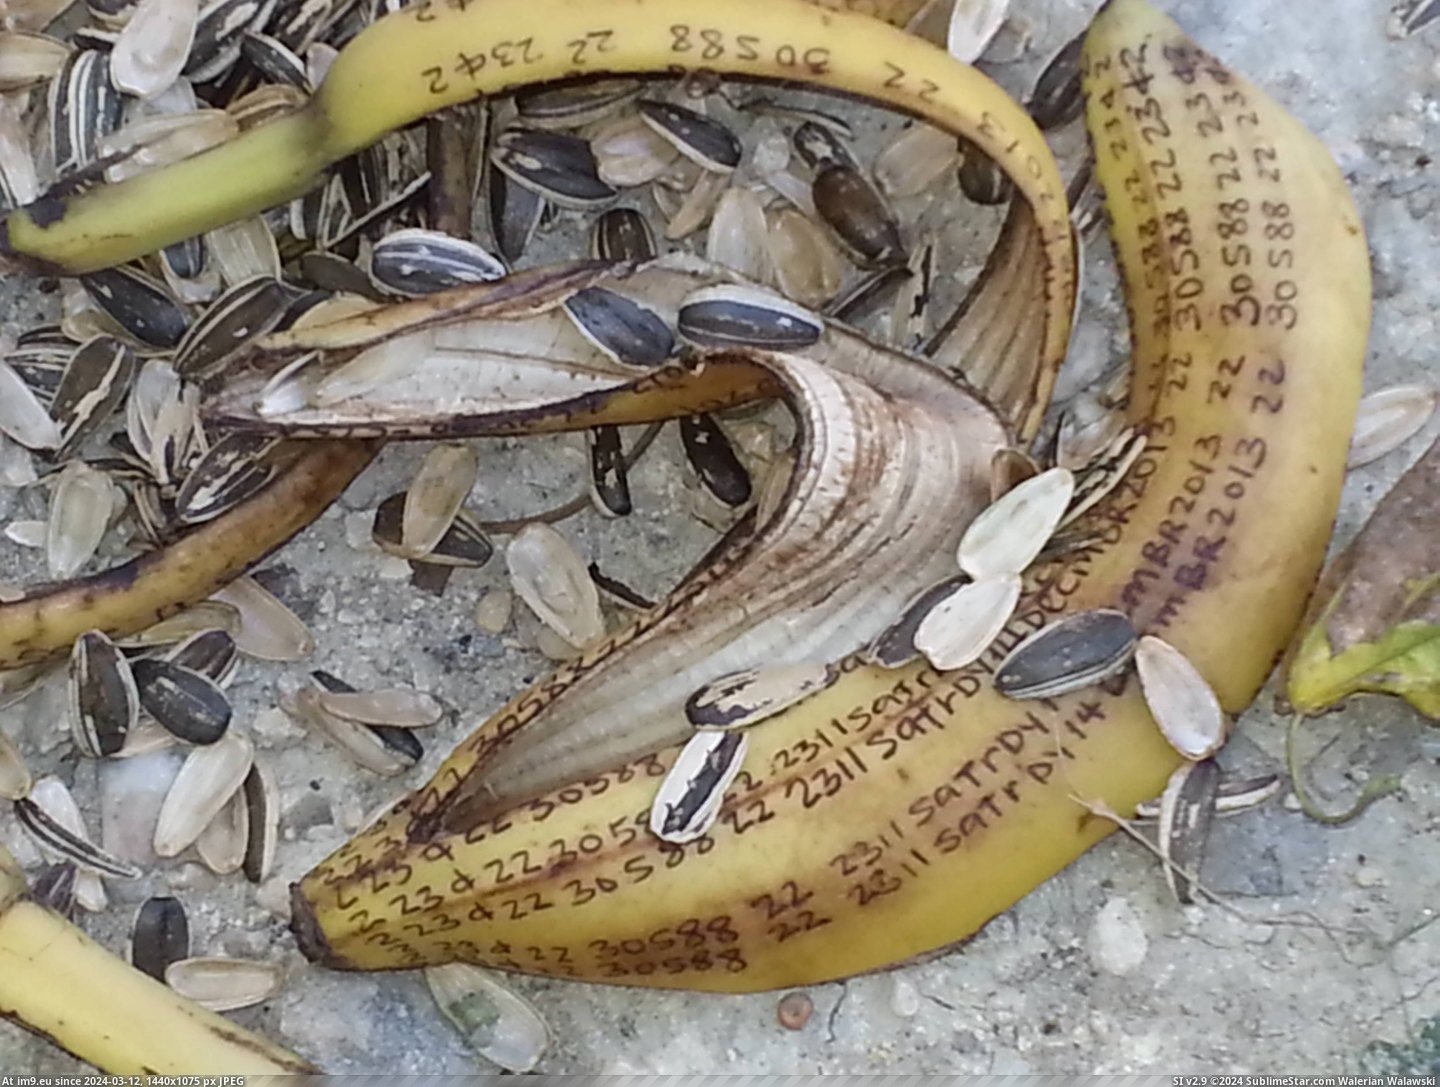 #Wtf #Job #Parking #Peel #Lot #Banana [Wtf] Found a banana peel in the parking lot at my job.....I think its trying to tell me something. ... Pic. (Image of album My r/WTF favs))